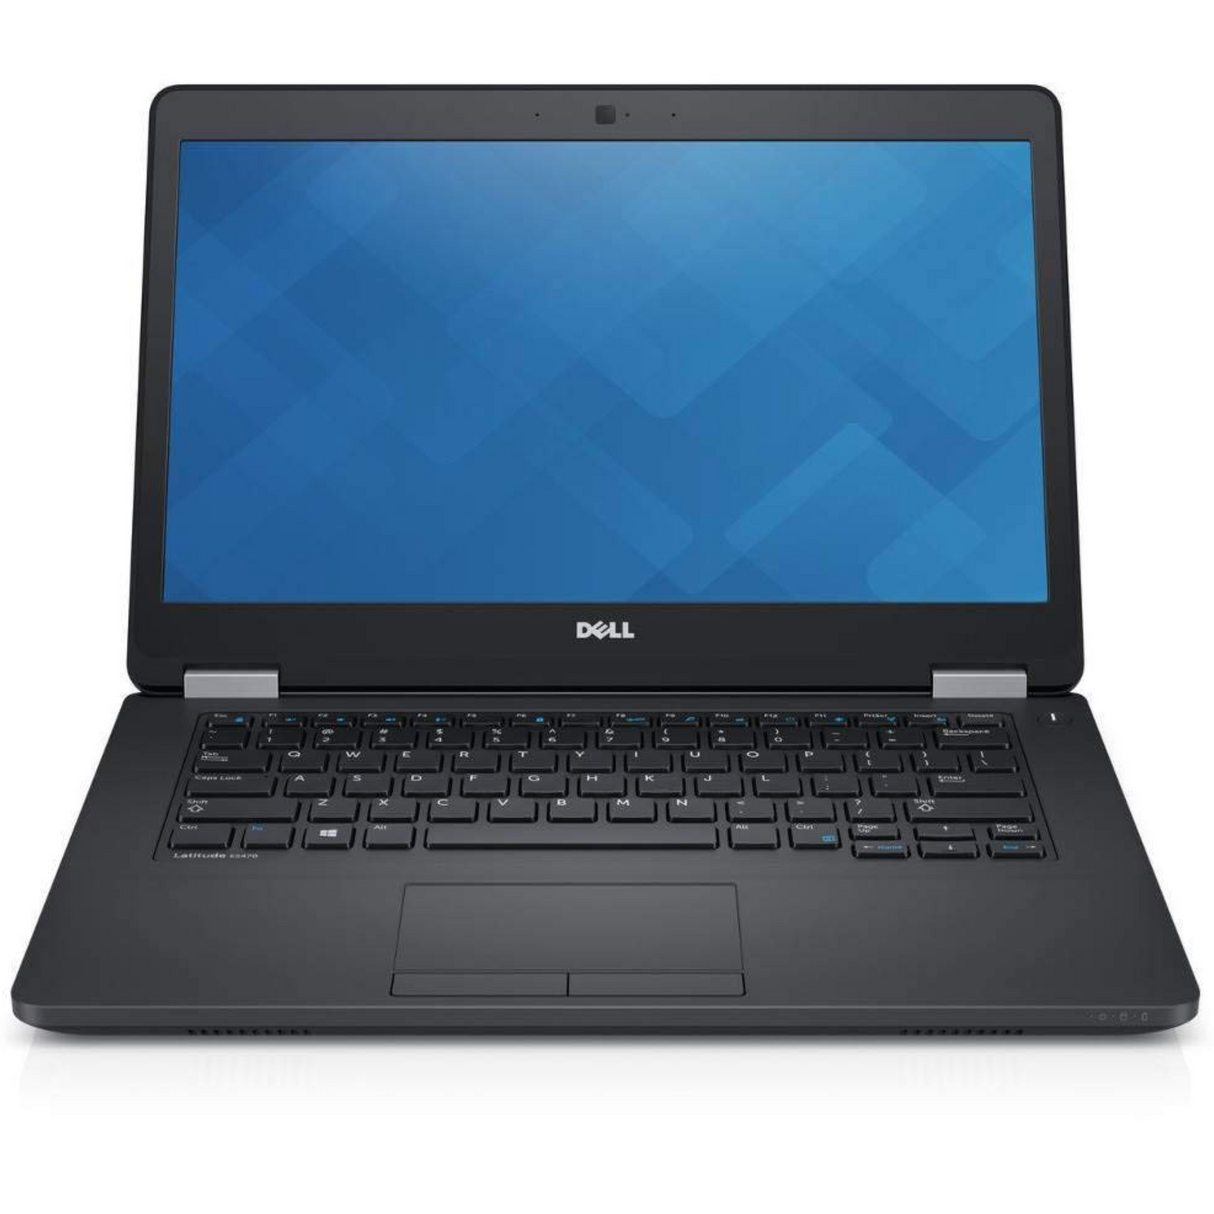 Dell Latitude E5470 Intel Core i5 6th Gen 14" Fhd Display Laptop Windows 10 with Ms Office 2016 (Refurbished)